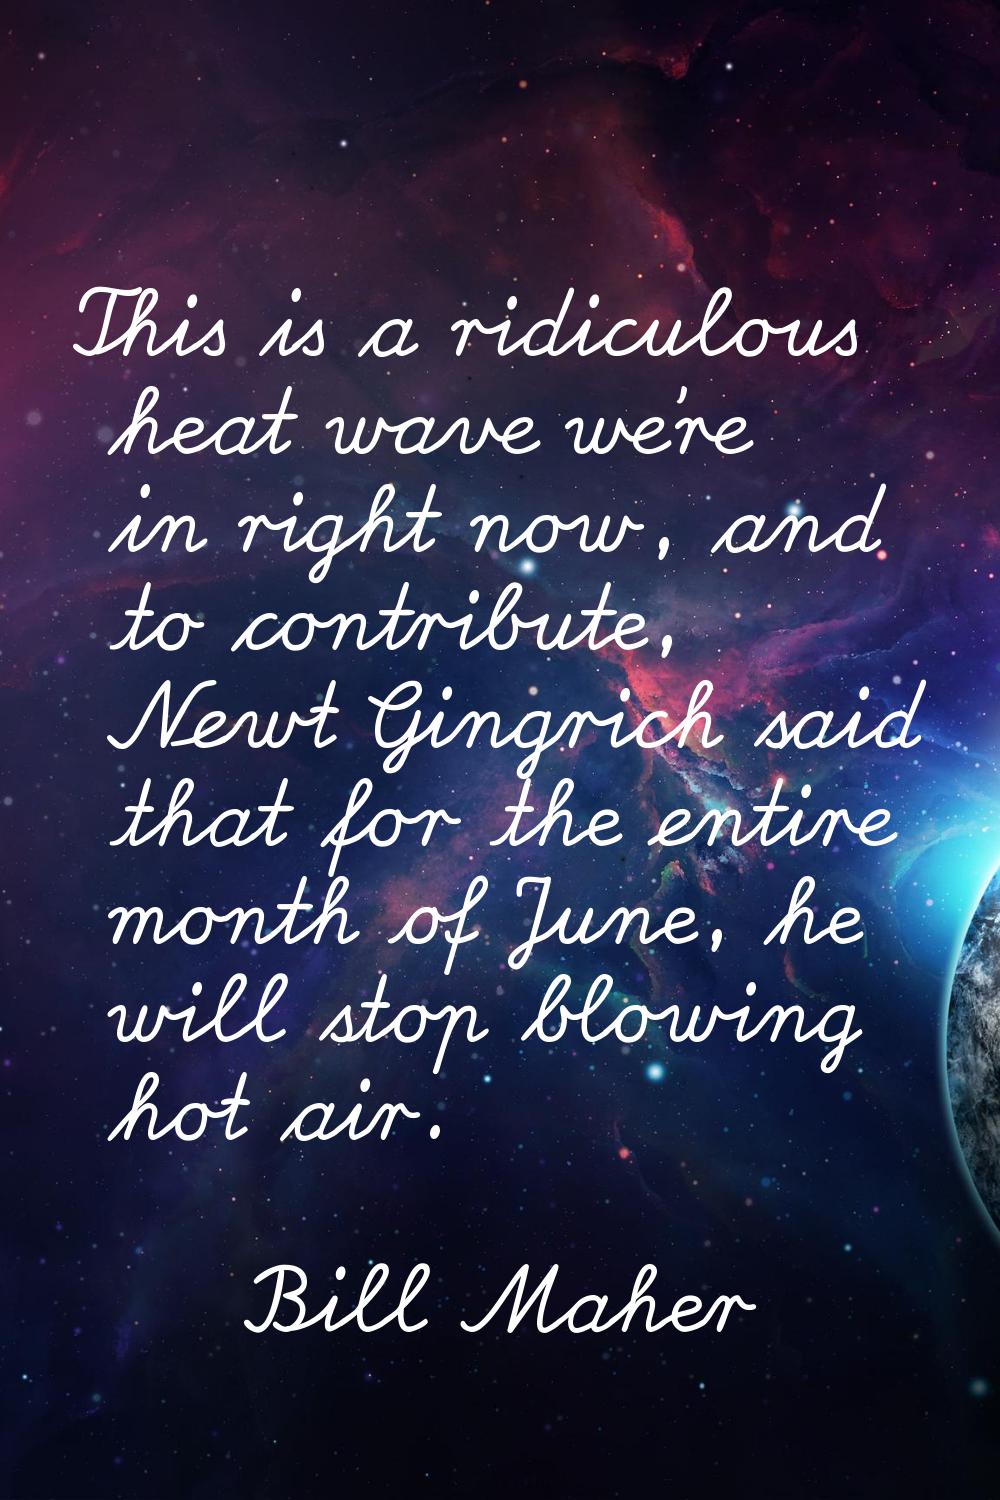 This is a ridiculous heat wave we're in right now, and to contribute, Newt Gingrich said that for t